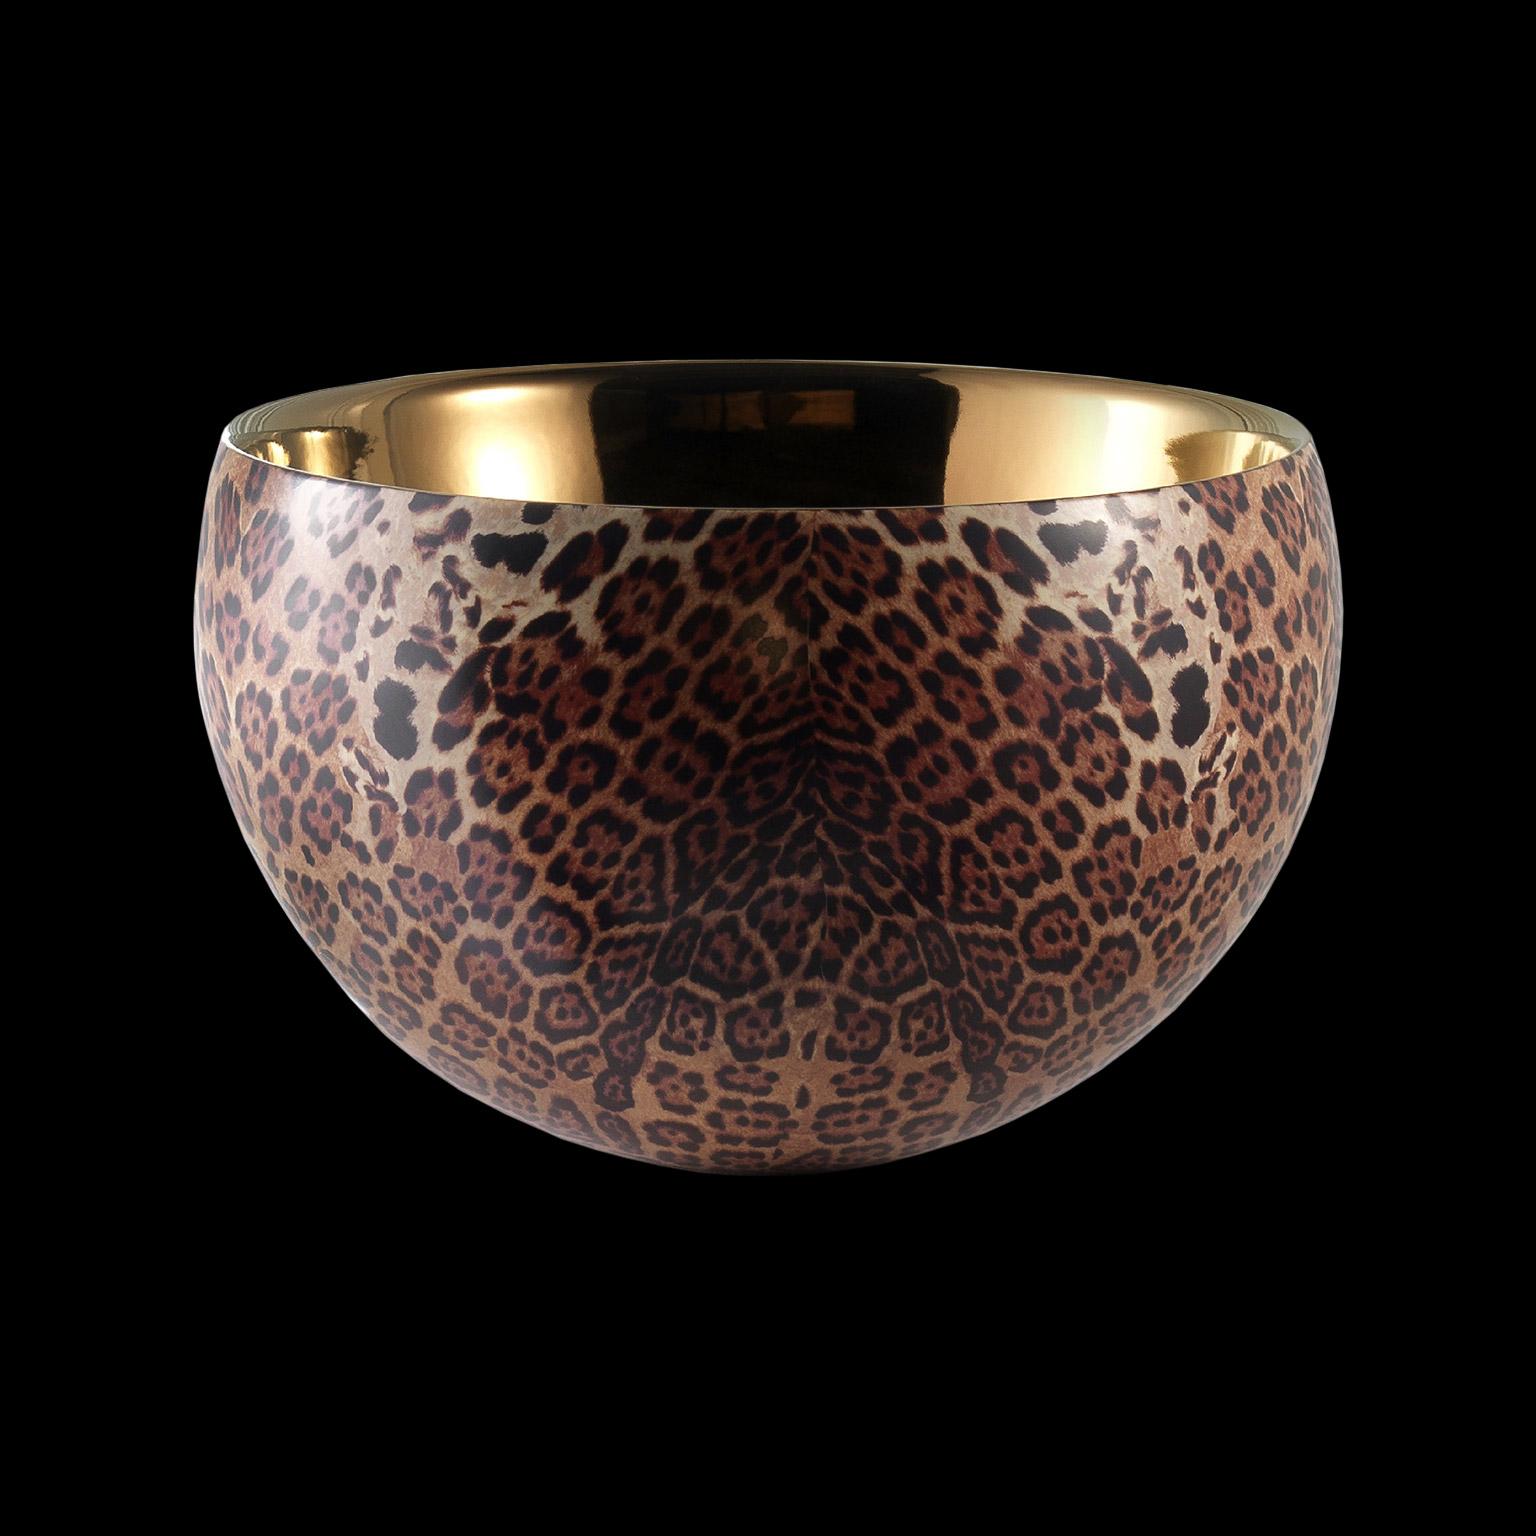 Ceramic bowl BOWLS
cod. BA055
handcrafted in bronze with 
leopard decoration outside

measures:
H. 30.0 cm.
Dm. 55.0 cm.